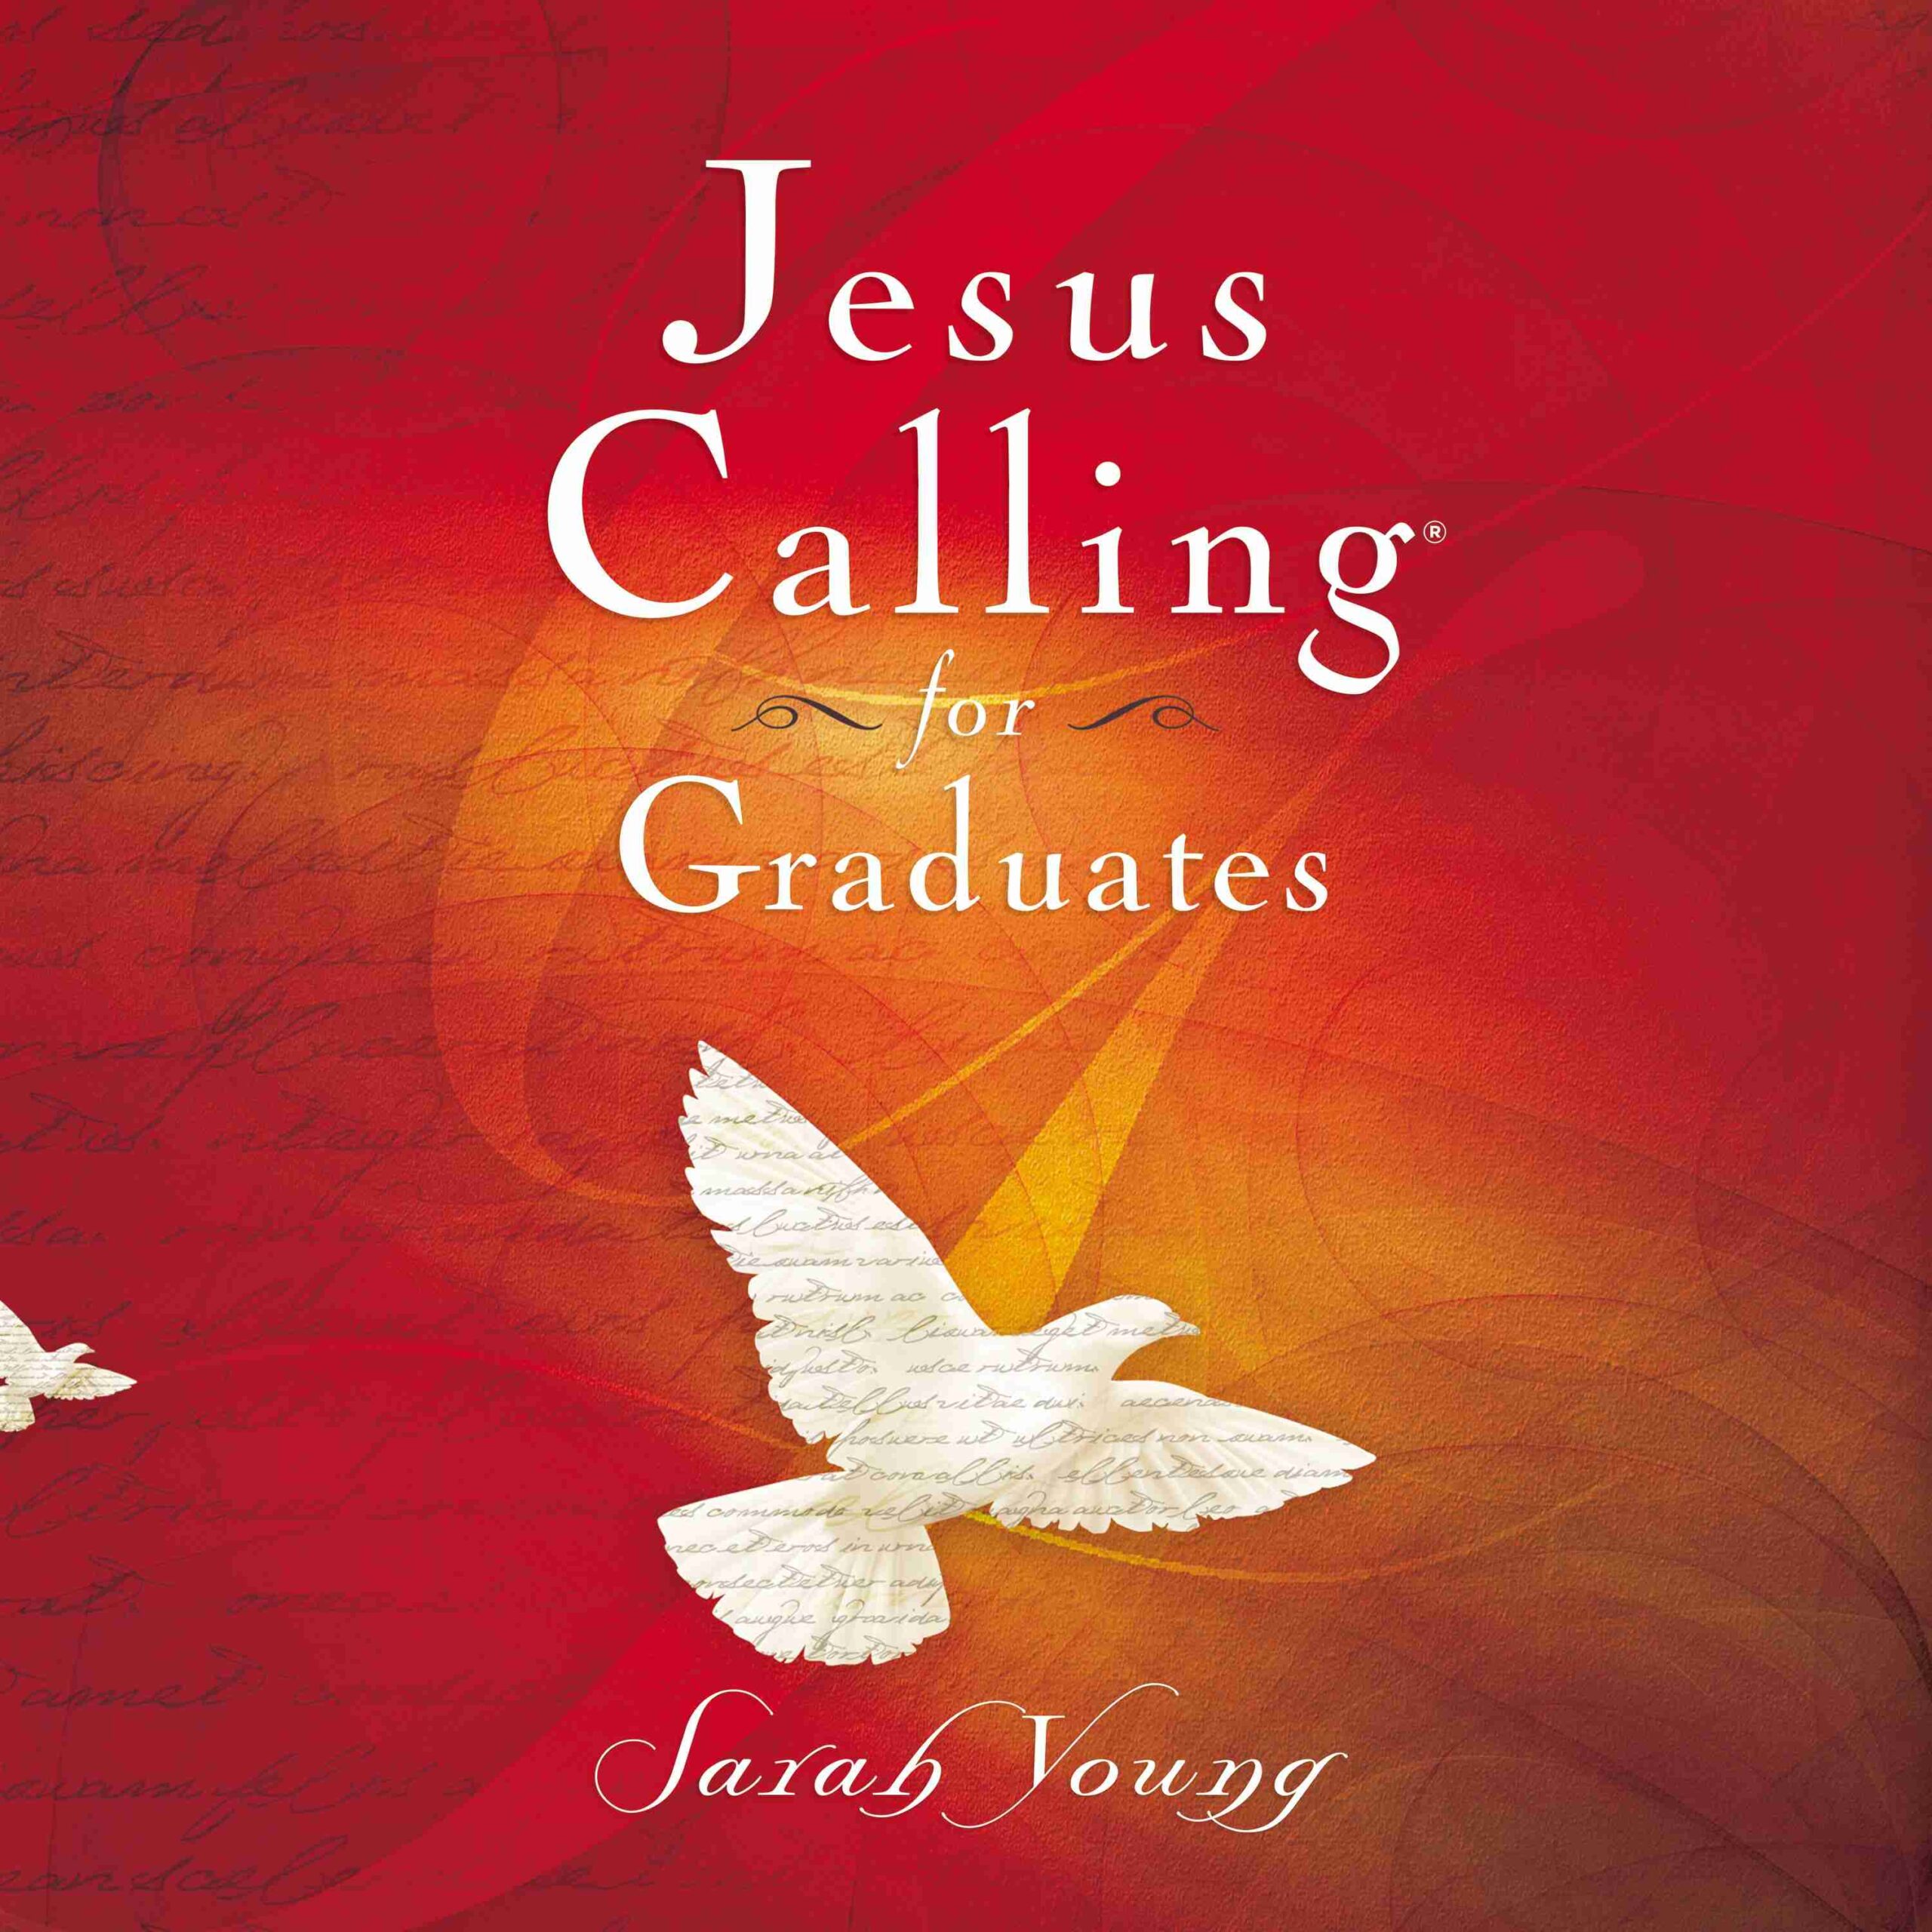 Jesus Calling for Graduates, with Scripture references